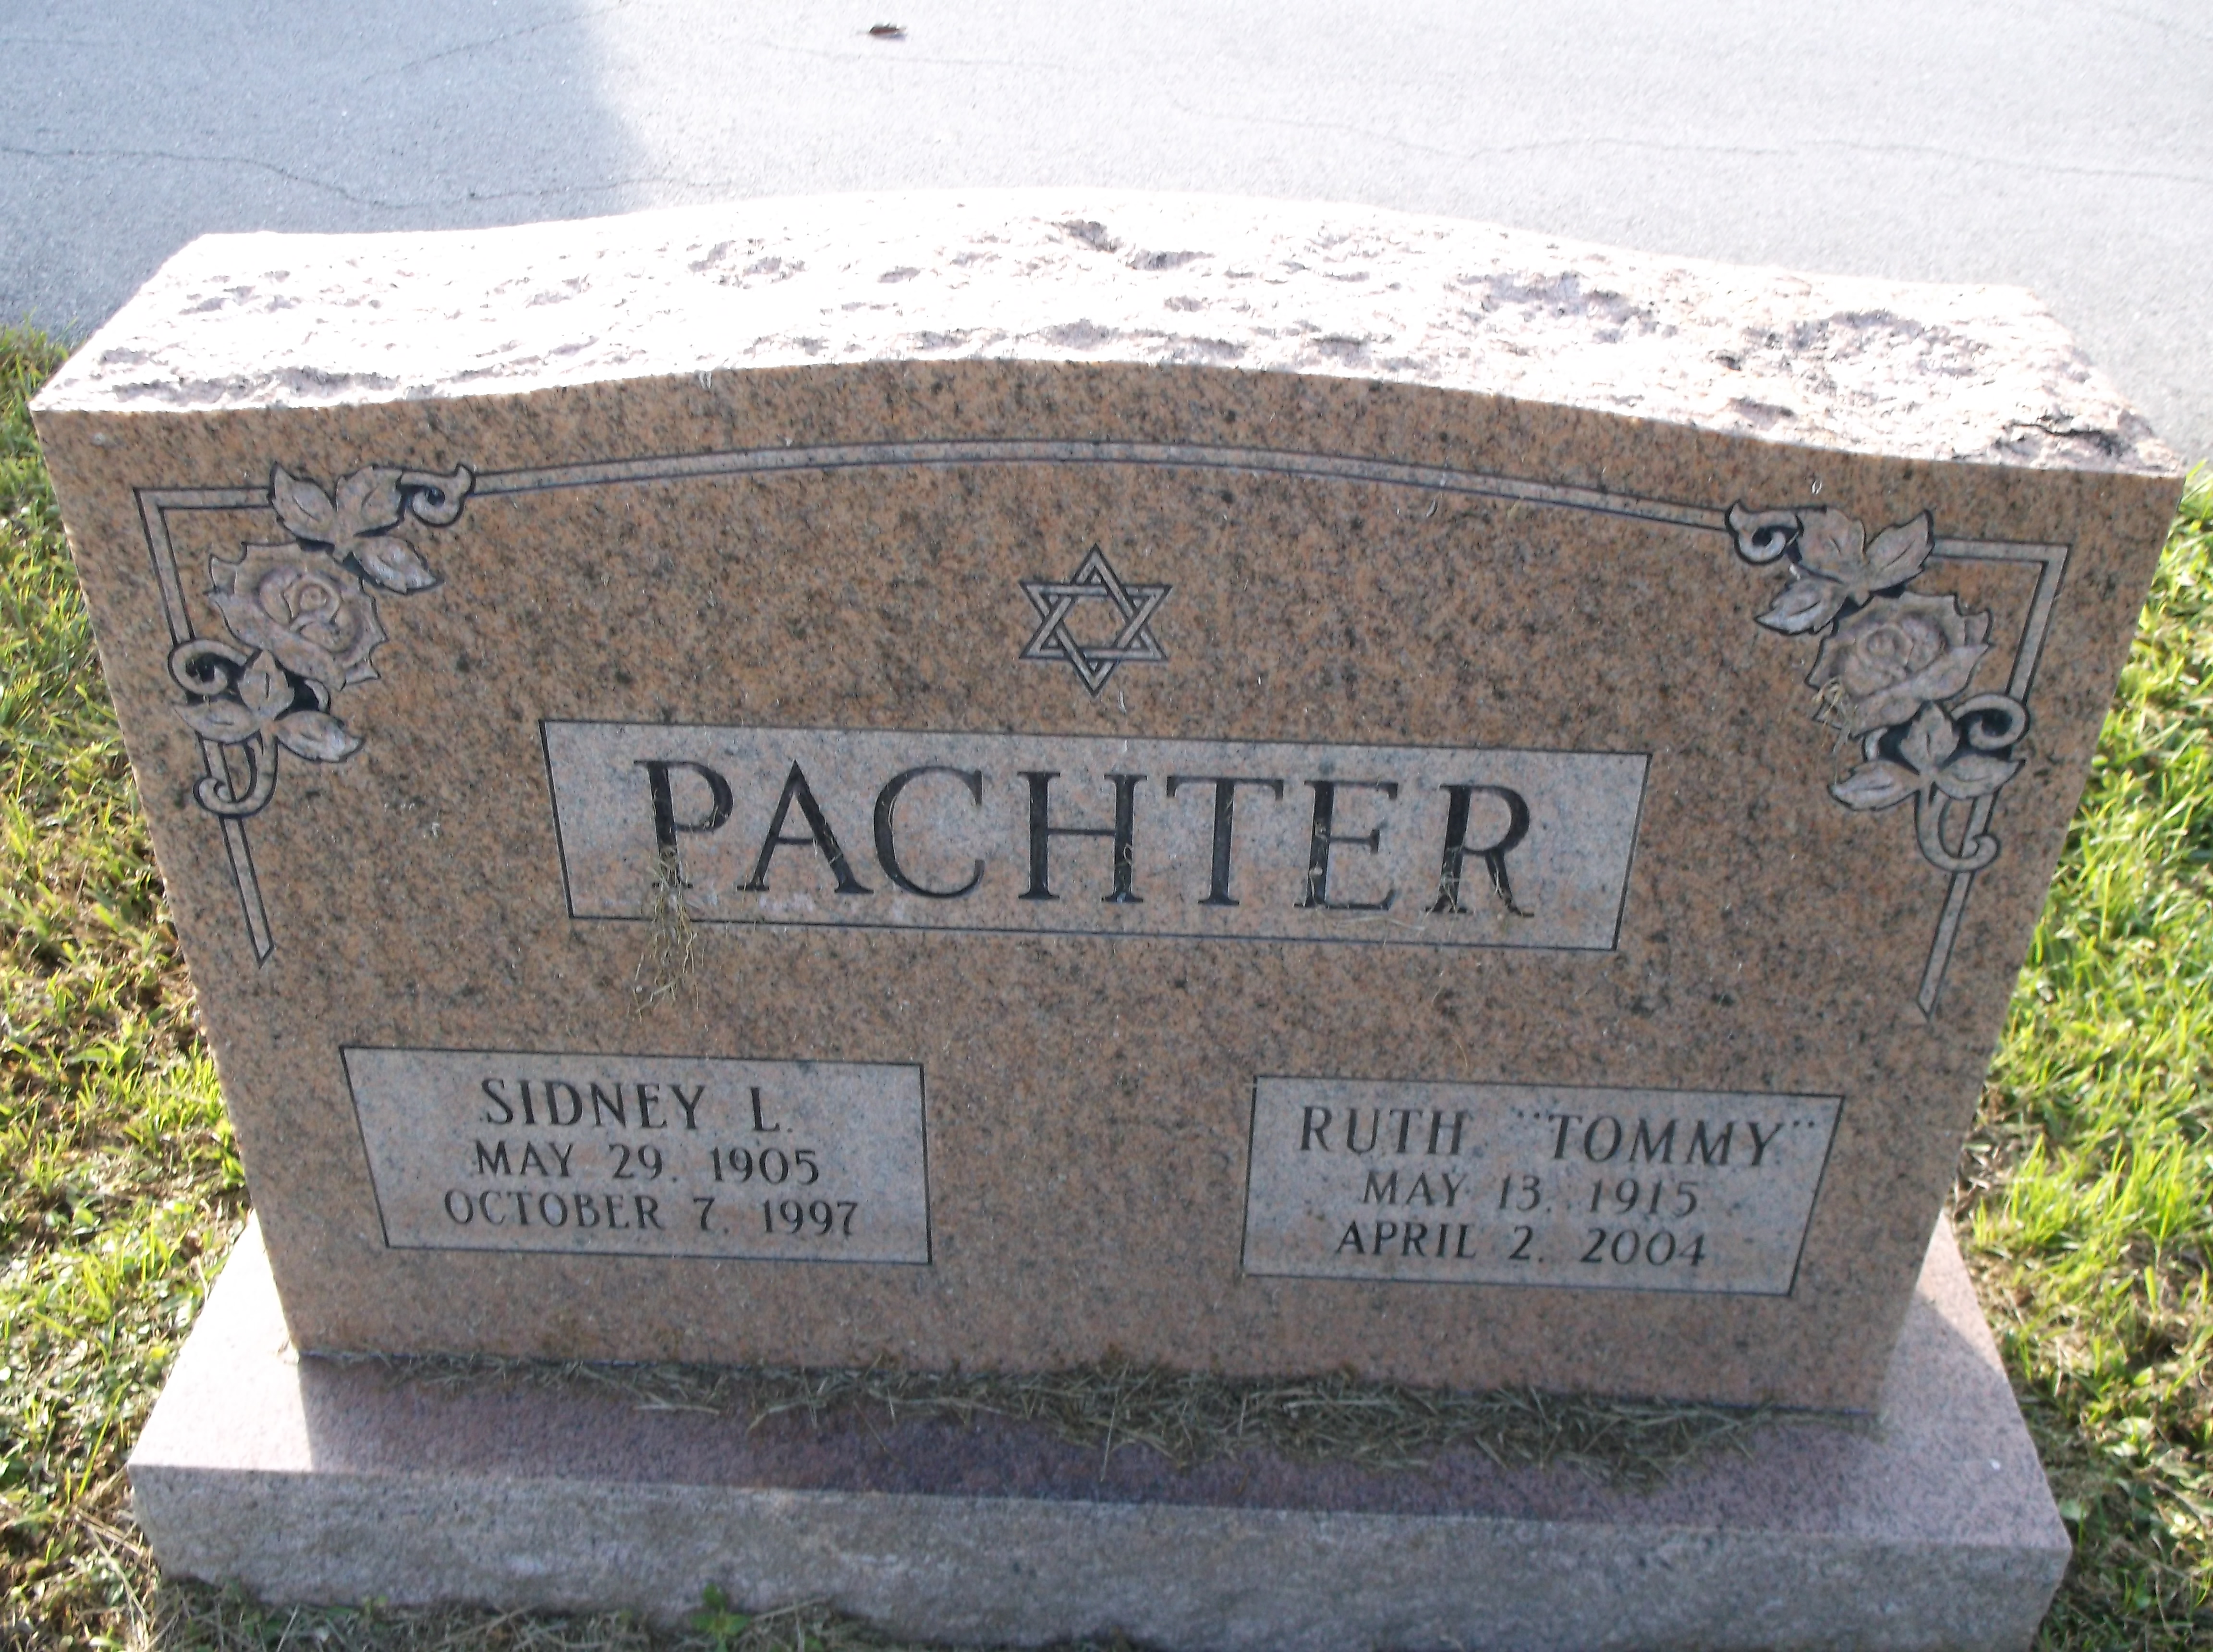 Ruth "Tommy" Pachter